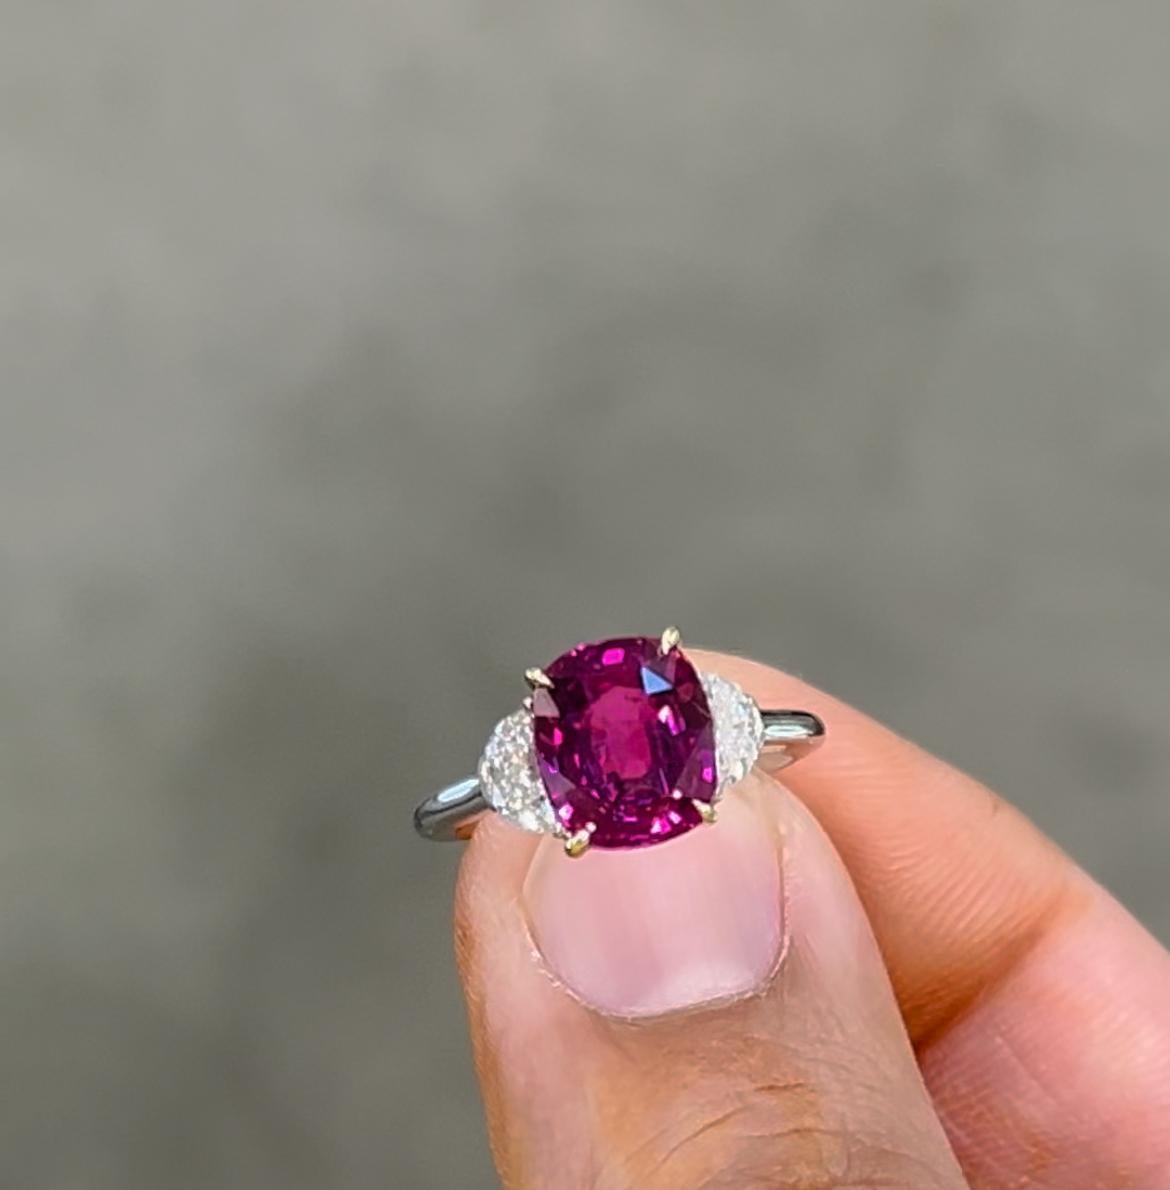 Women's 4.11 carat cushion-cut, untreated Mozambique Ruby ring. AGL certified.  For Sale